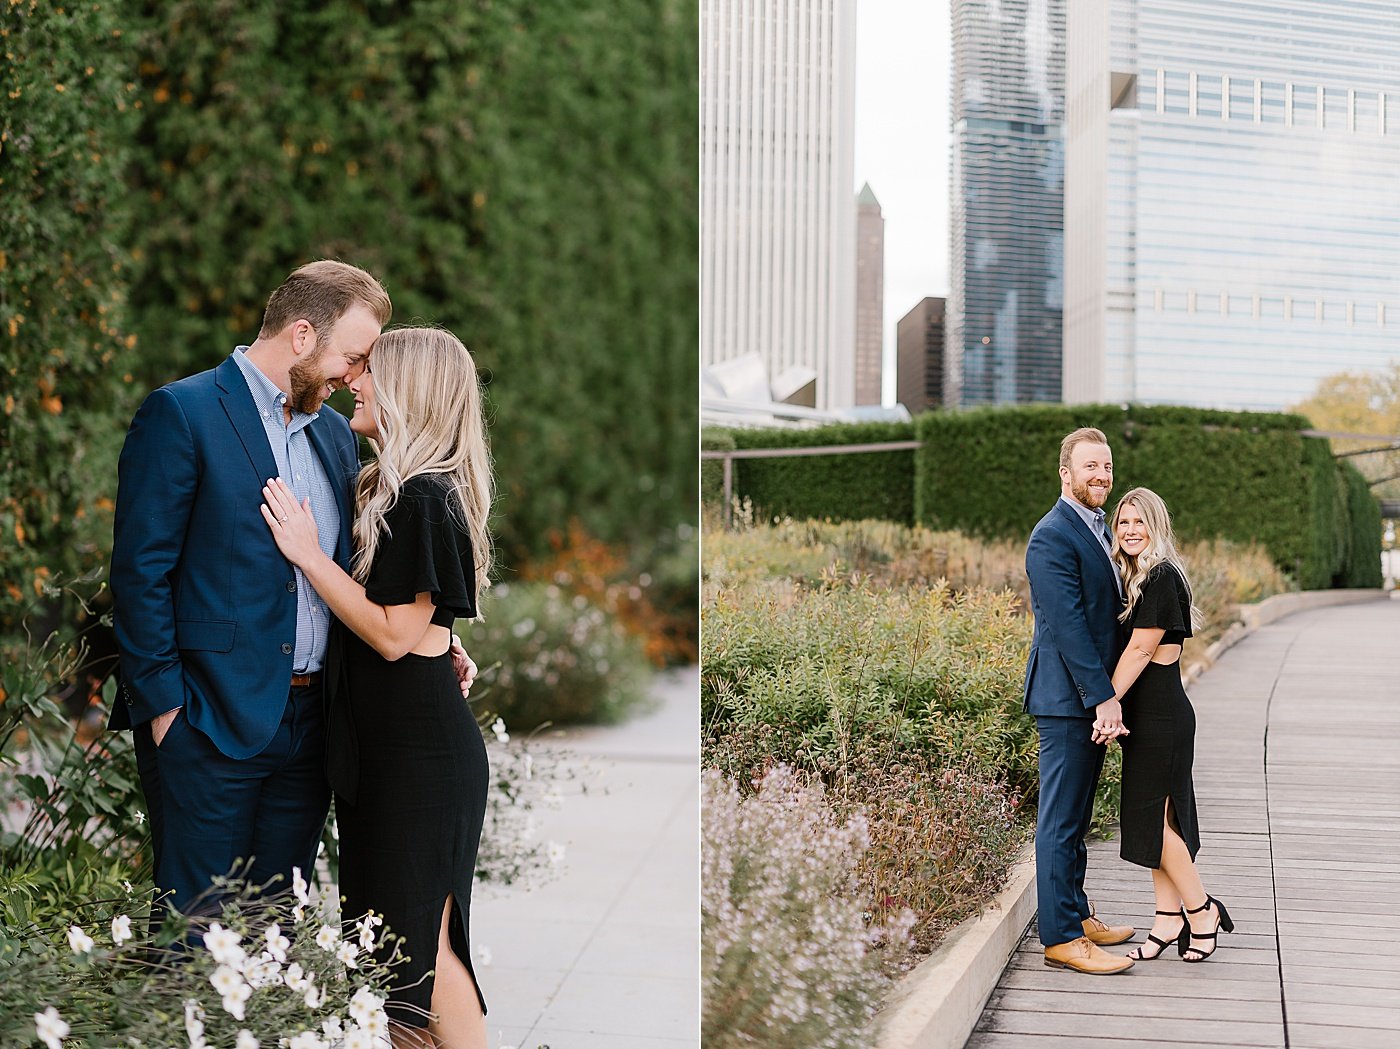 Keegan and Mark's Downtown Chicago Engagement Session Rebecca Shehorn Photography31.jpg